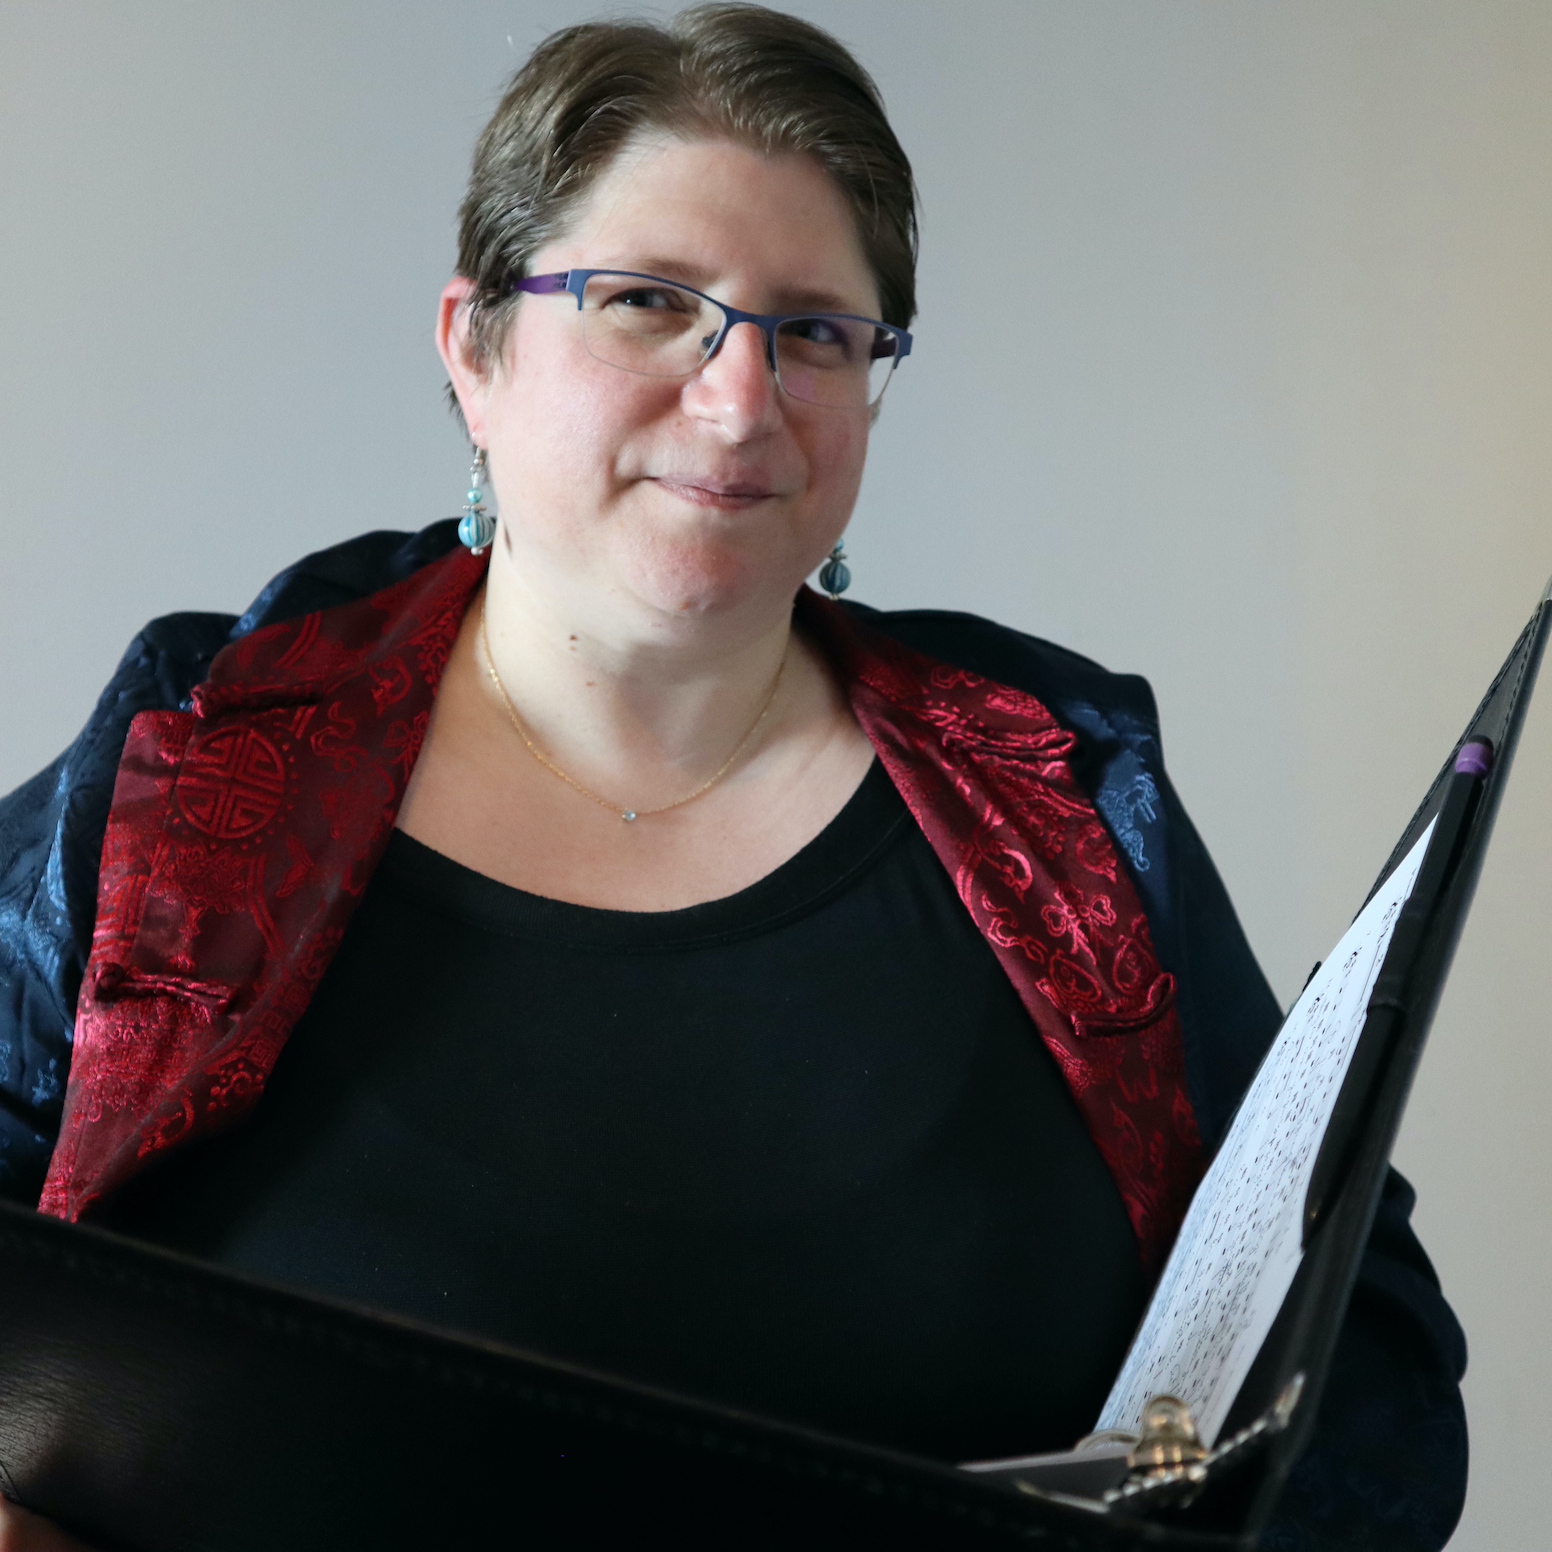 A white woman with short brown hair wearing glasses, earrings, a blue and red vest, and holding a folio.